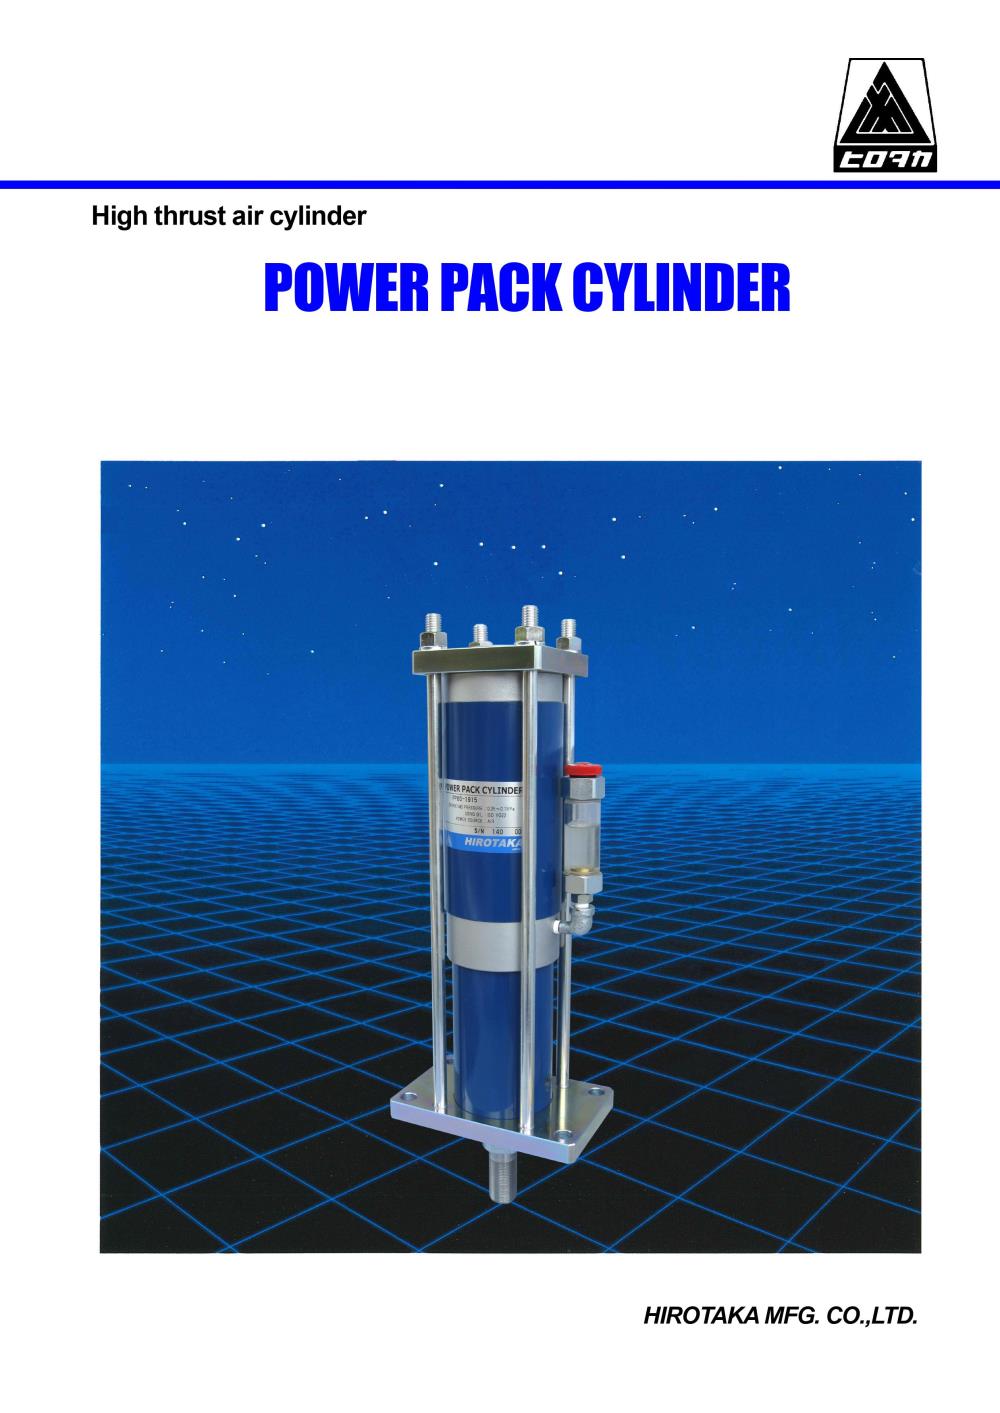 HIROTAKA Power Pack Cylinder PP50 Series,PP50, PP50-0510, PP50-1005, HIROTAKA, Power Pack Cylinder, Cylinder, Power Cylinder,HIROTAKA,Machinery and Process Equipment/Equipment and Supplies/Cylinders